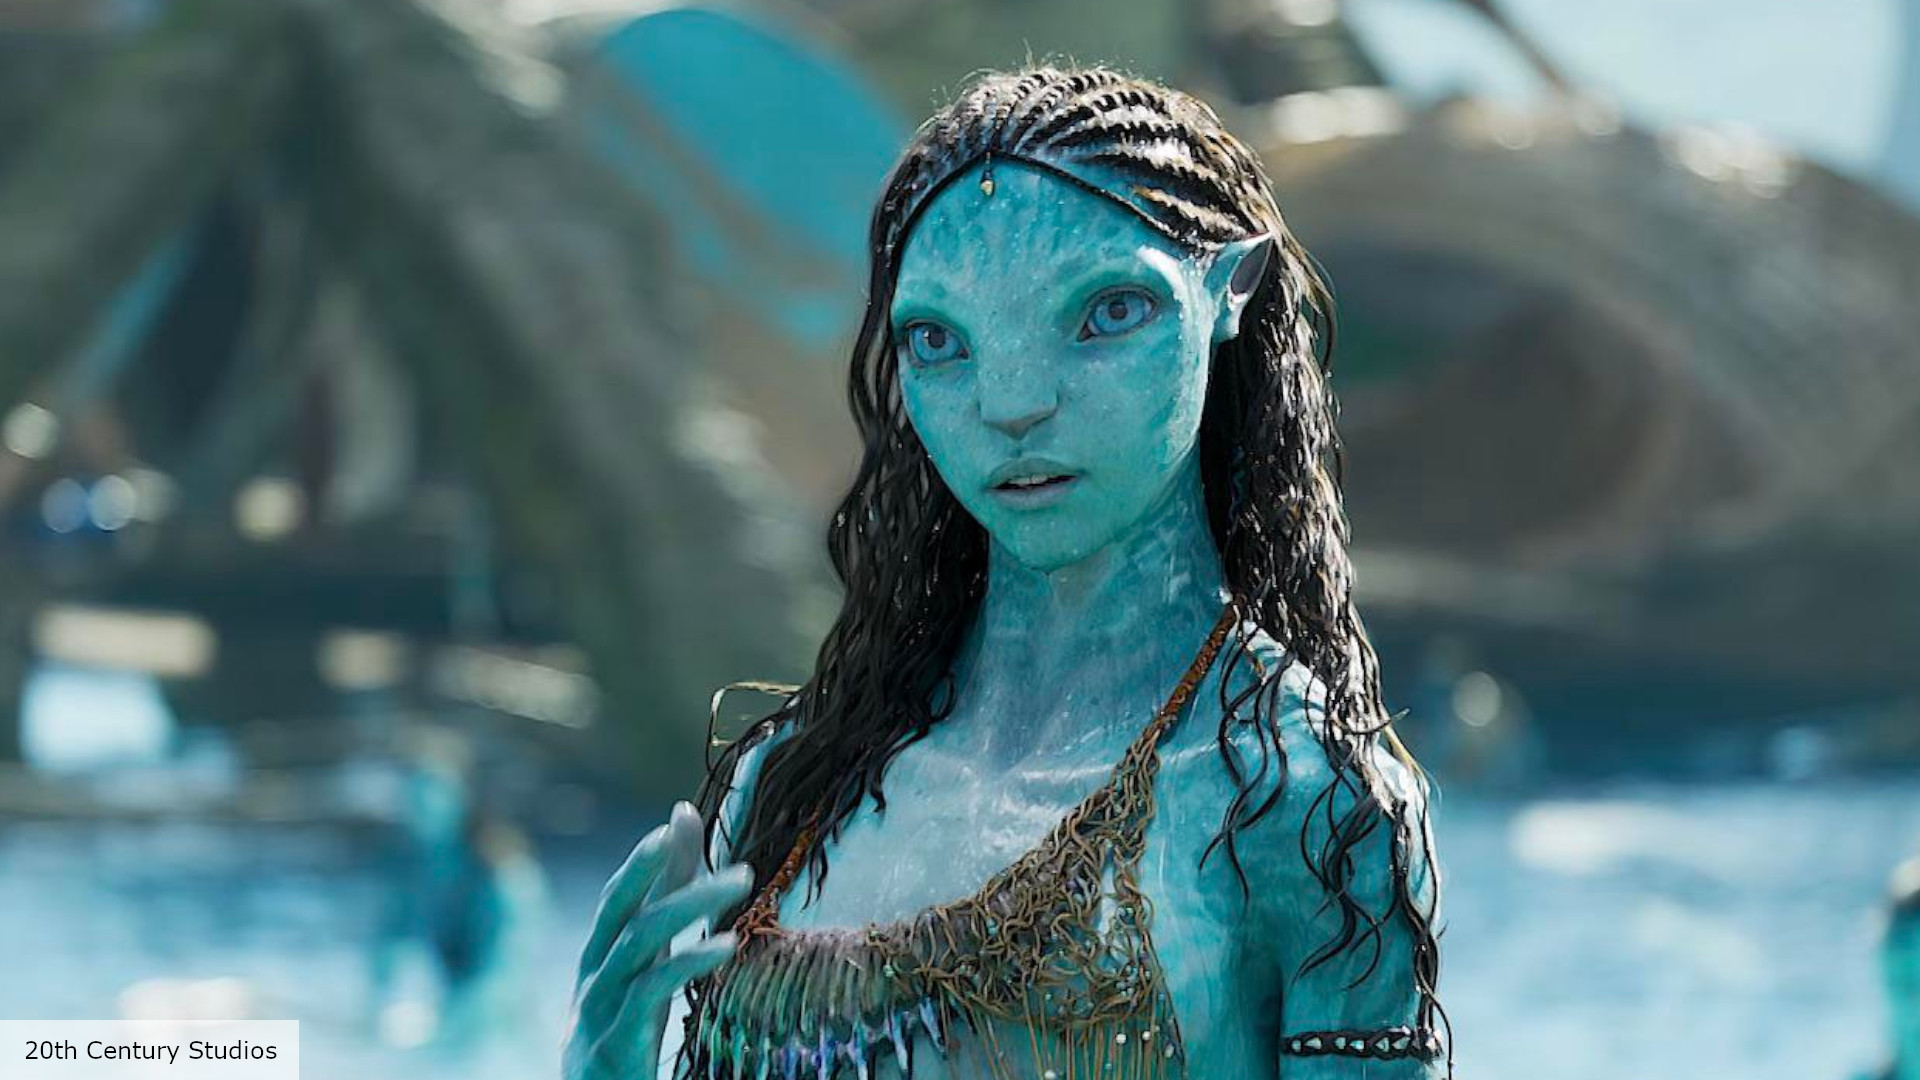 Avatar 2 Game of Thrones actor Oona Chplin joins the cast shooting to  begin this September  Entertainment NewsThe Indian Express